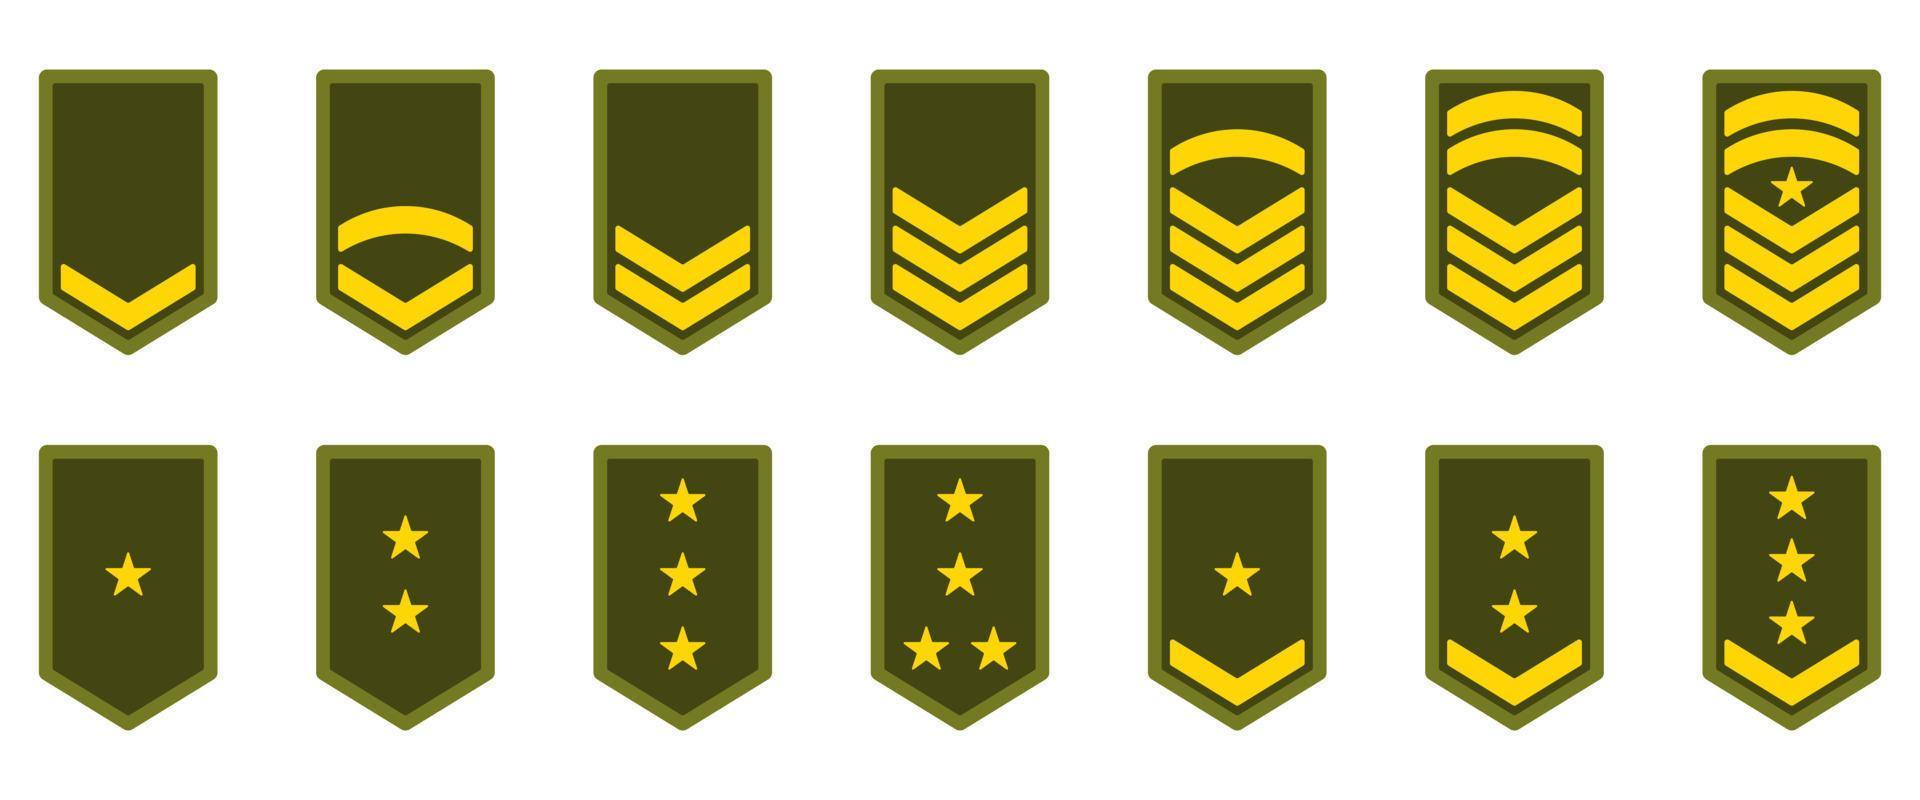 Military Badge Insignia Green Symbol. Army Rank Icon. Chevron Yellow Star and Stripes Logo. Soldier Sergeant, Major, Officer, General, Lieutenant, Colonel Emblem. Isolated Vector Illustration.